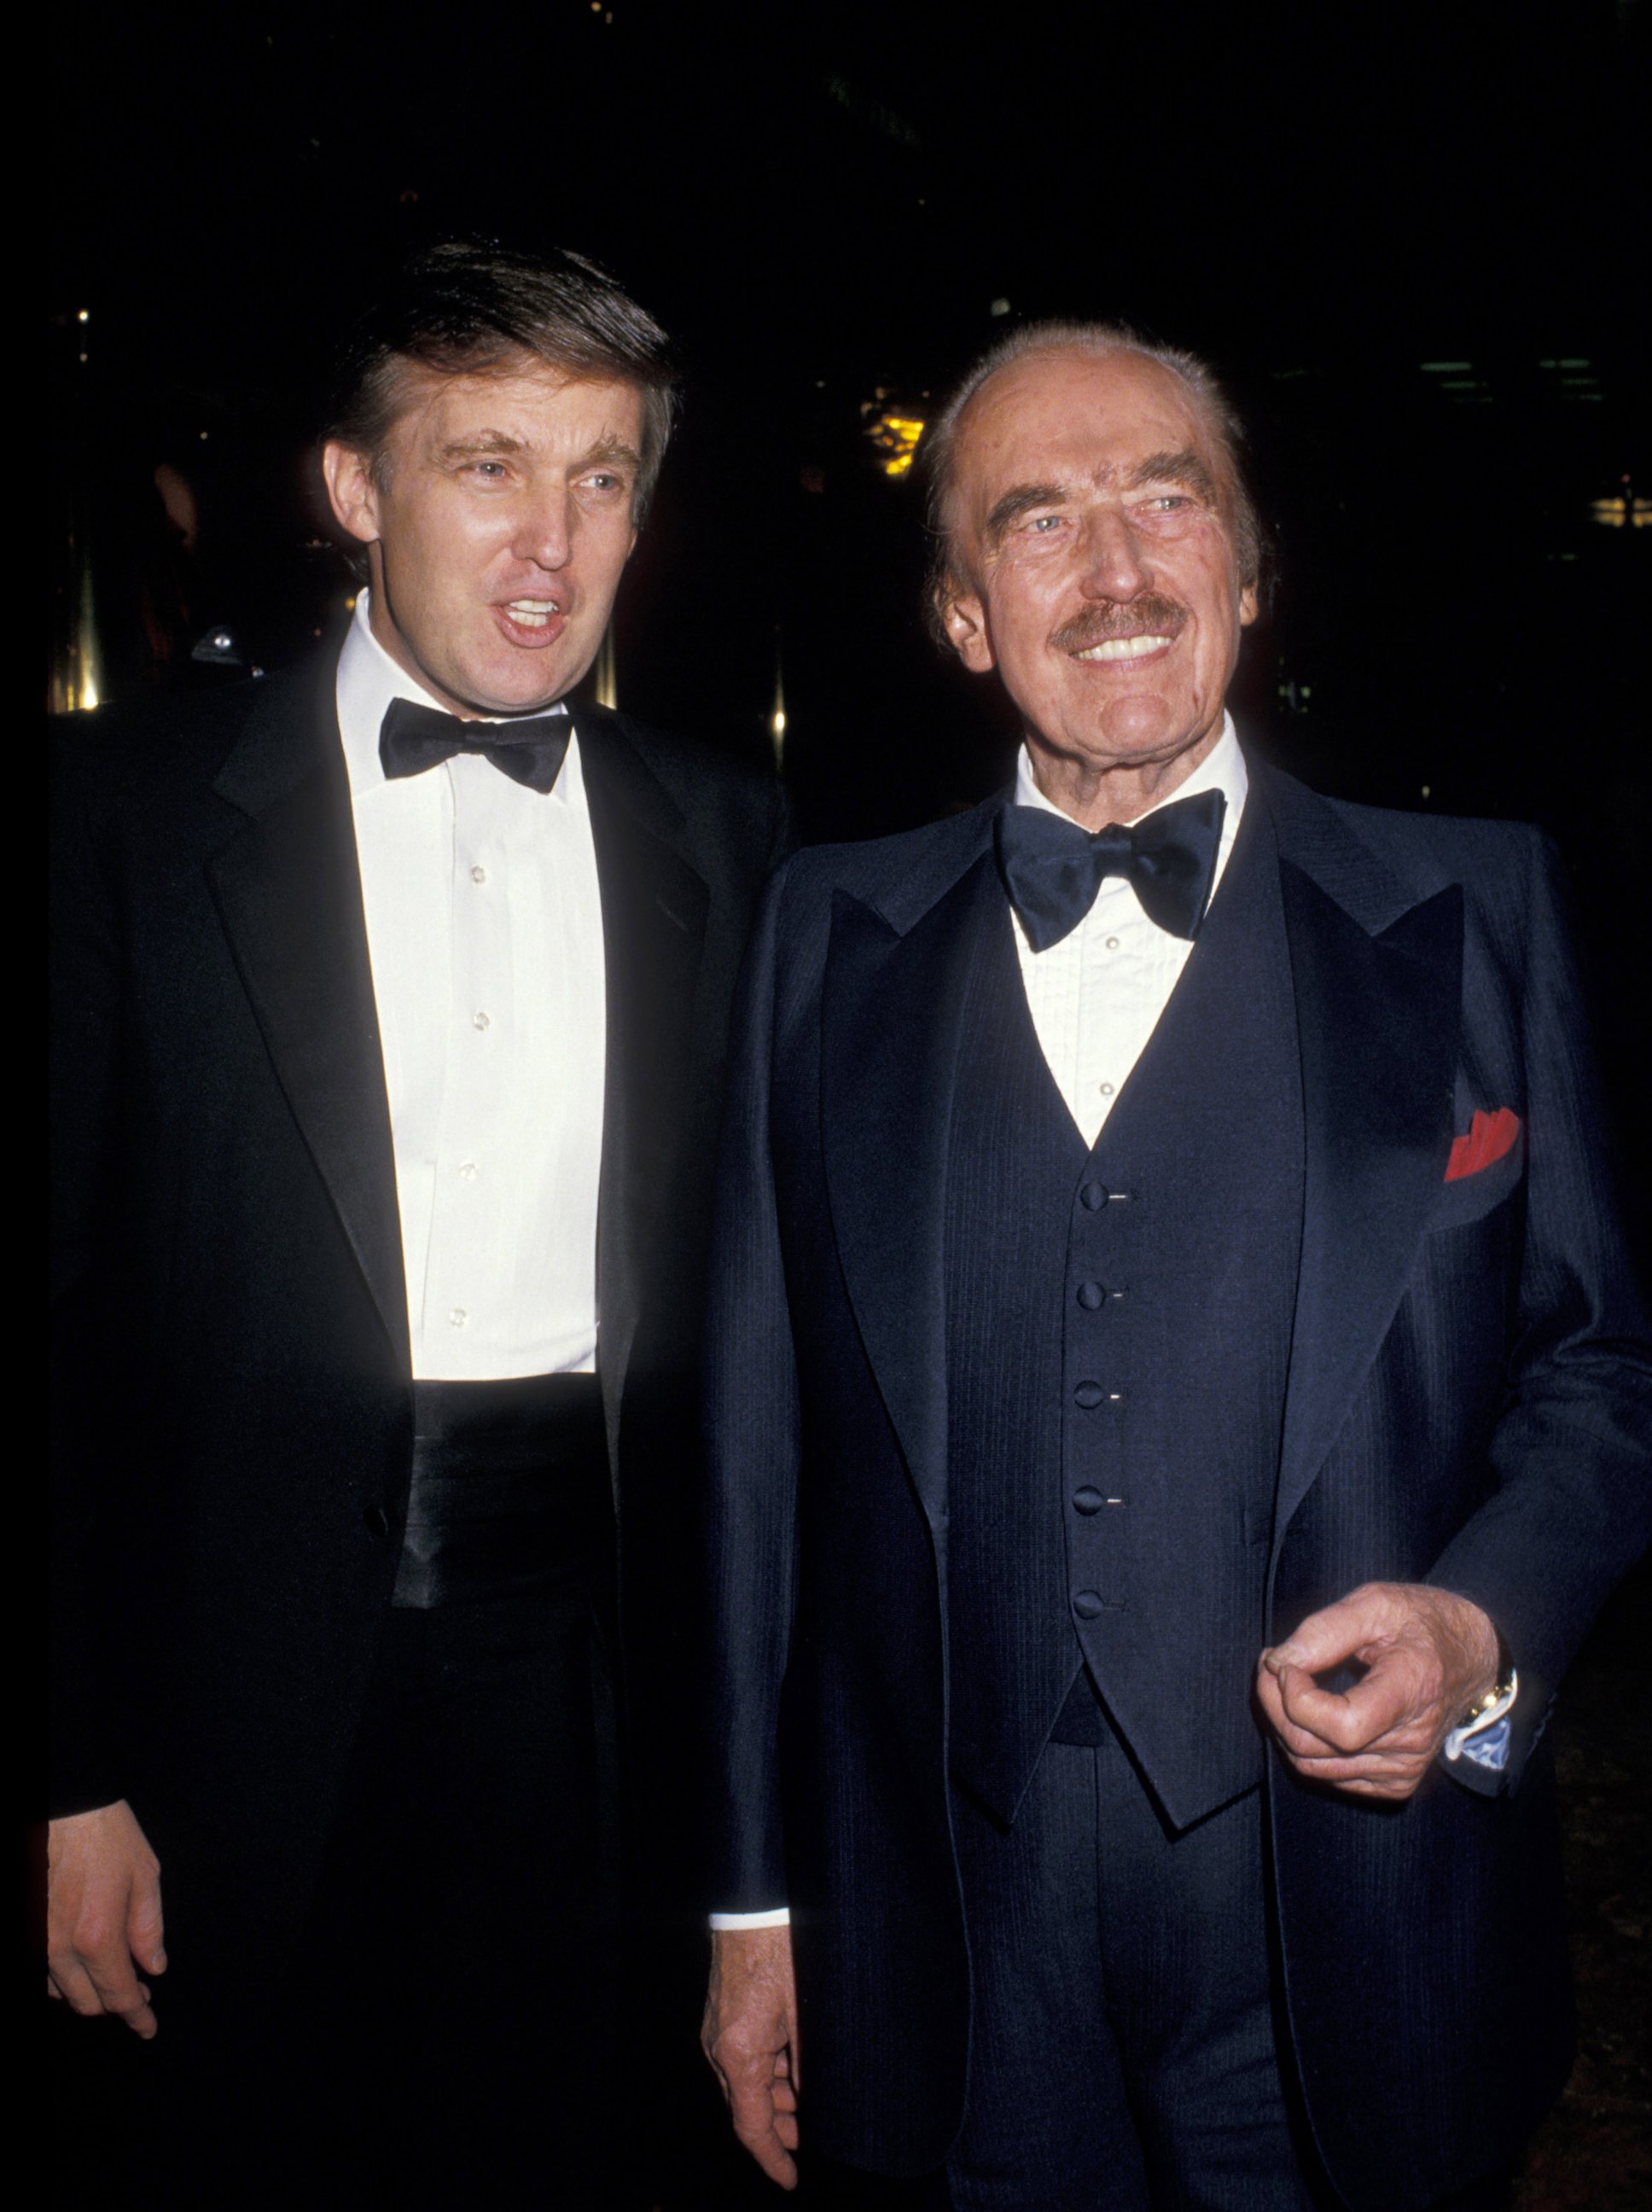 PHOTO: Donald Trump and Fred Trump are pictured during Donald Trump Celebrates His Book "The Art of The Deal" at Trump Towers Atrium in New York City. 